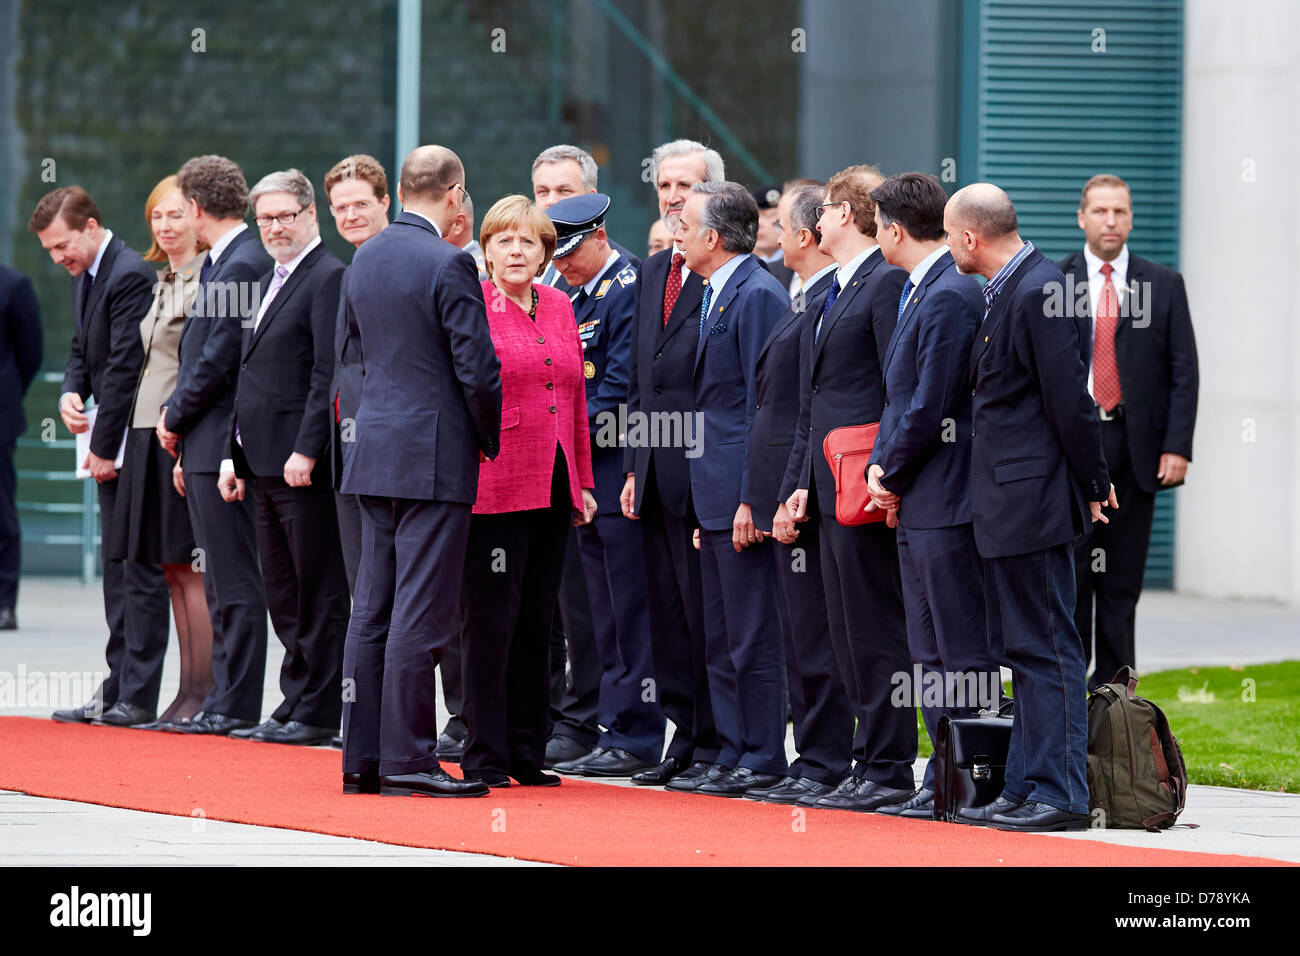 Berlin, Germany. 30th April 2013. Greeting of the Prime Minister of the Italian Republic, Enrico Letta, with military honors by German Chancellor Angela Merkel in the main courtyard of the Federal Chancellery in Berlin. On Picture:  Angela Merkel (CDU), German Chancellor, and Enrico Letta, new Prime Minister of Italia, greats the Federal Ministers fron bouth Country. Credit:  Reynaldo Chaib Paganelli / Alamy Live News Stock Photo